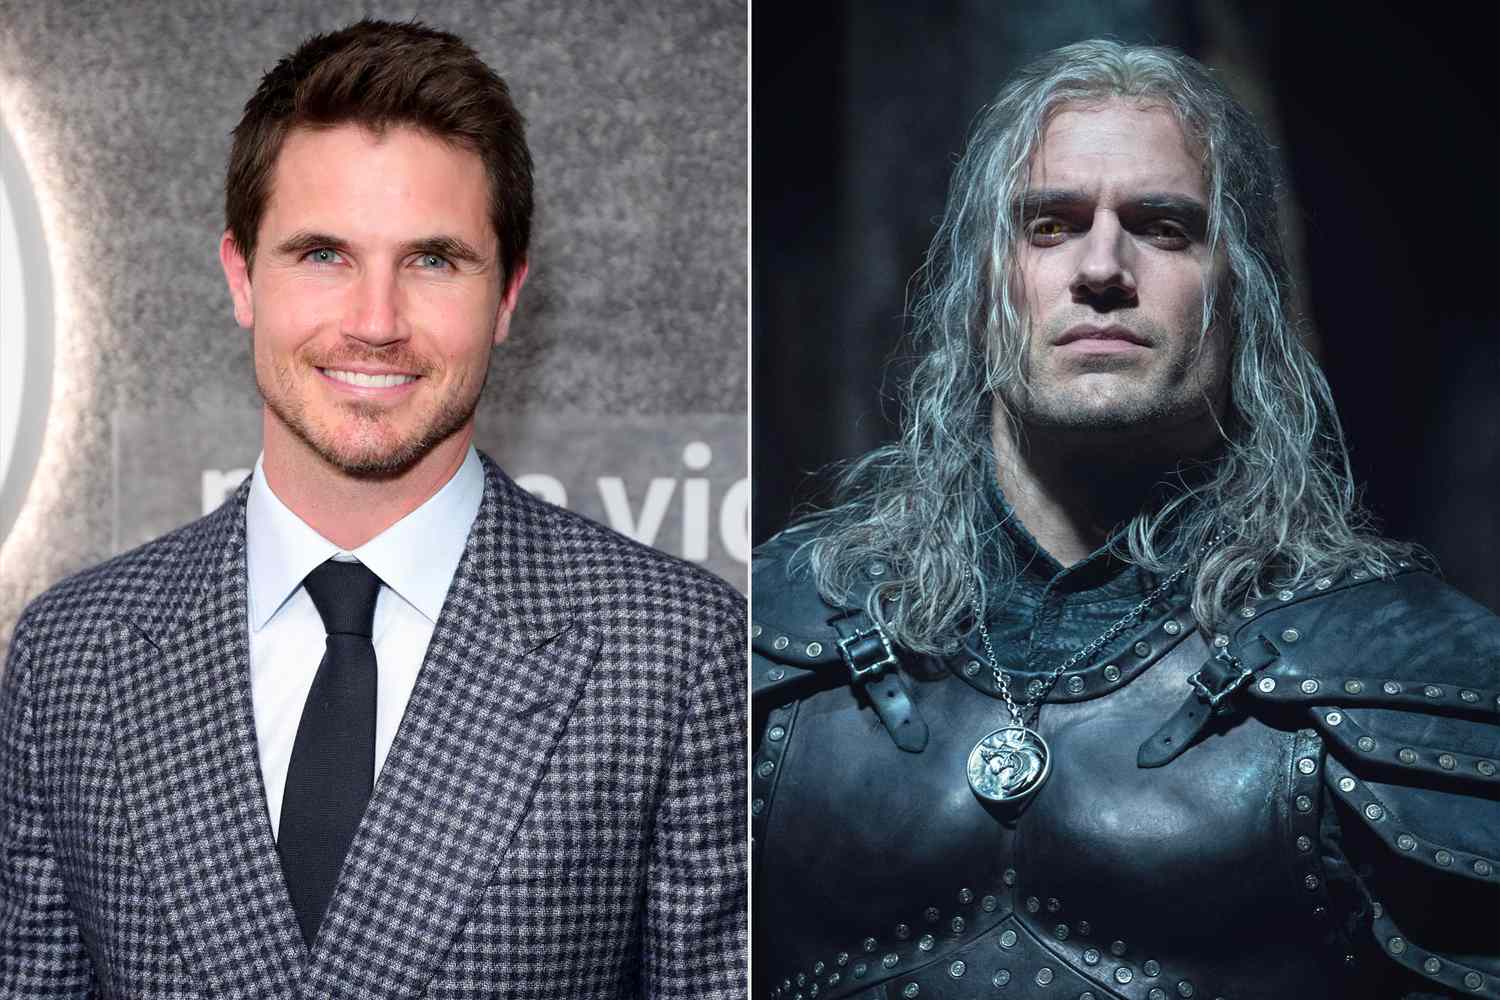 Robbie Amell and Henry Cavill in The Witcher season 2